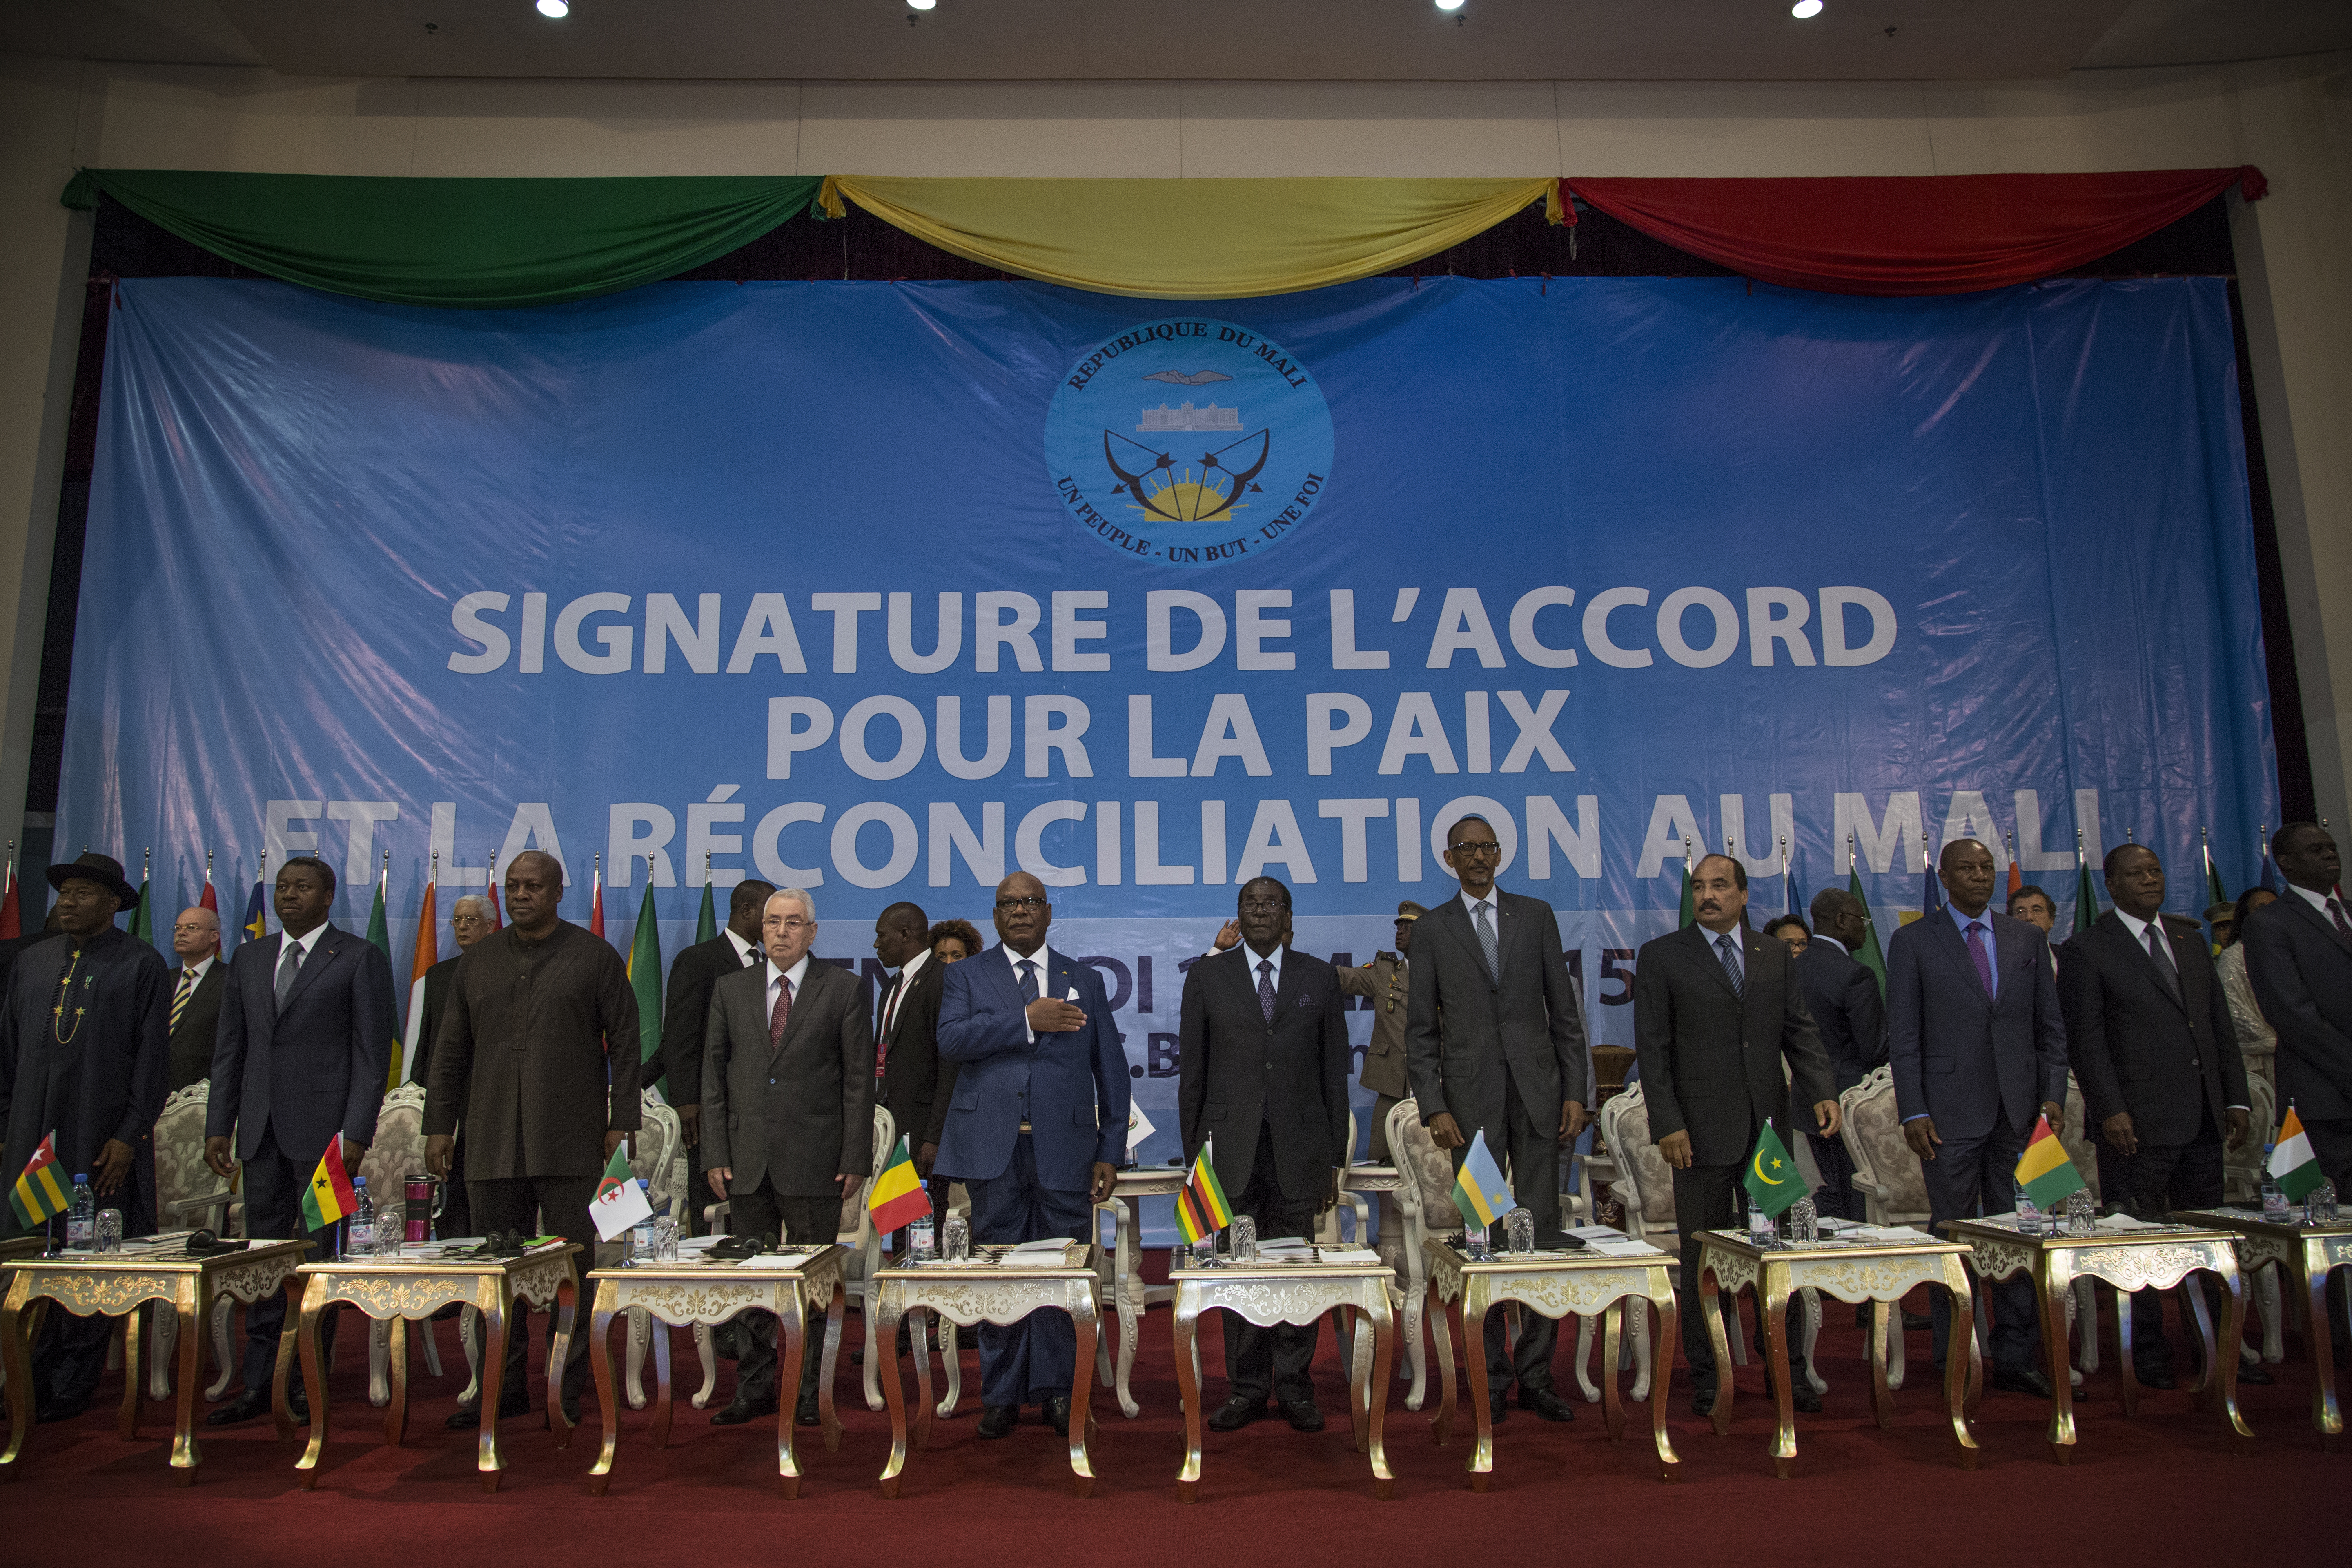 African leaders attend signing ceremony of the Peace Agreement in Mali (photo credit: UN Photo/Marco Dormino/Flickr)